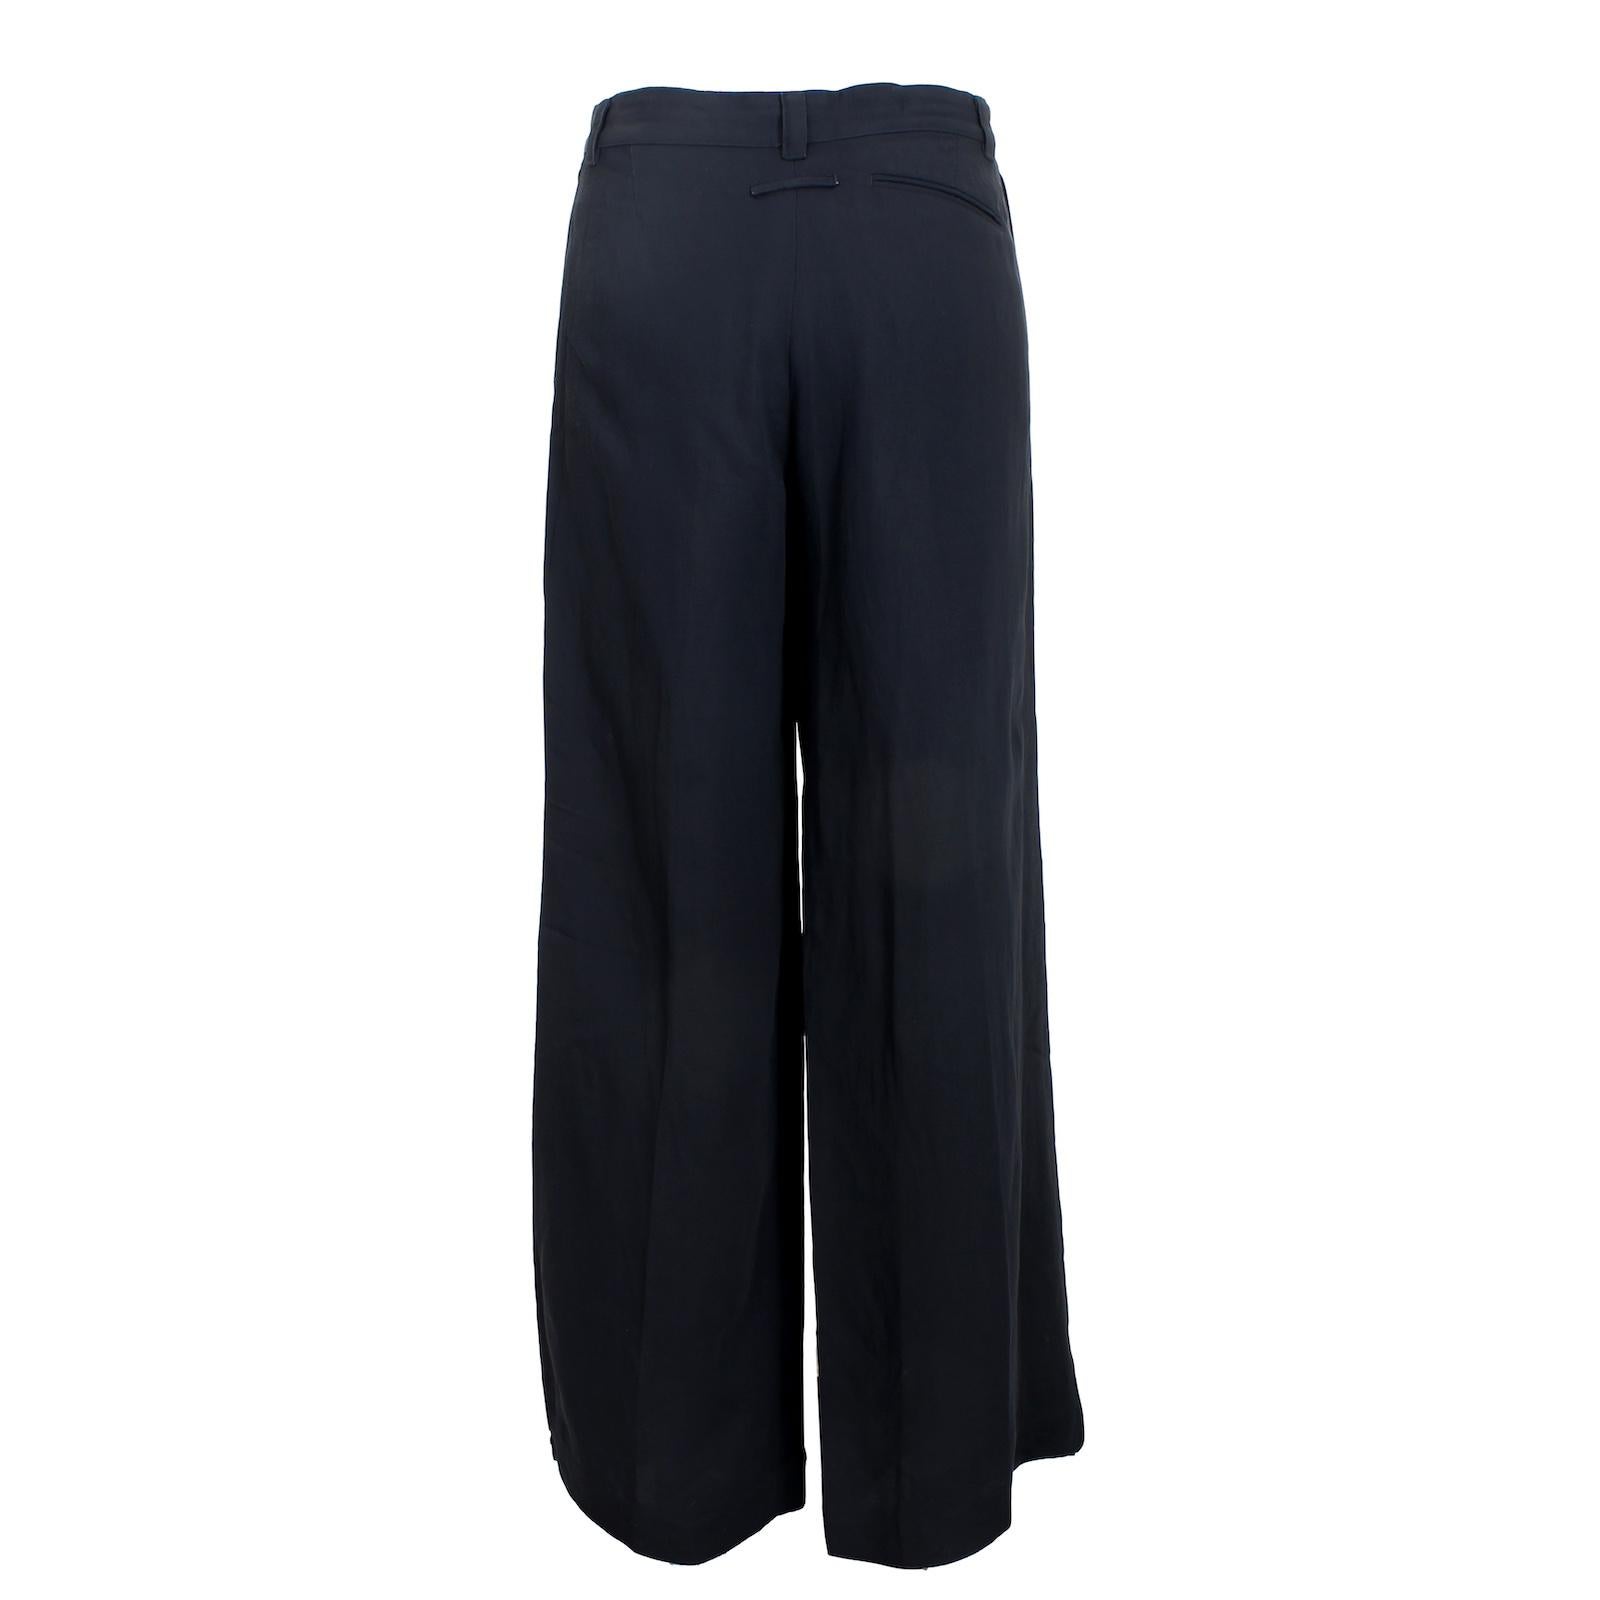 Jean Paul Gaultier Black Linen Evening Palazzo Pants In Excellent Condition For Sale In Brindisi, Bt